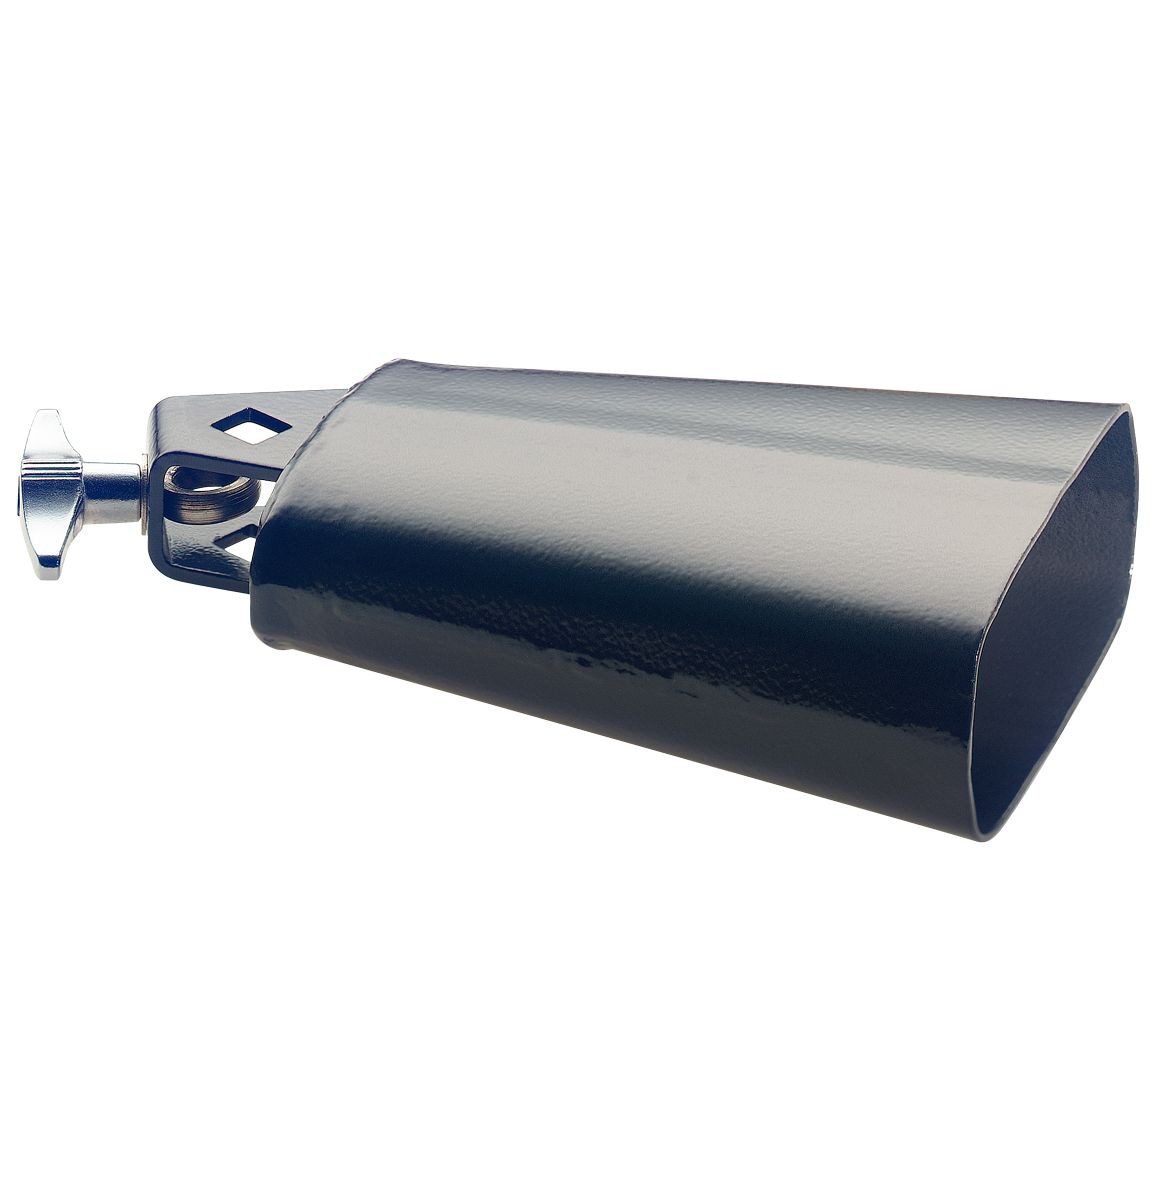 Stagg CB 305 BK - cowbell 5,5